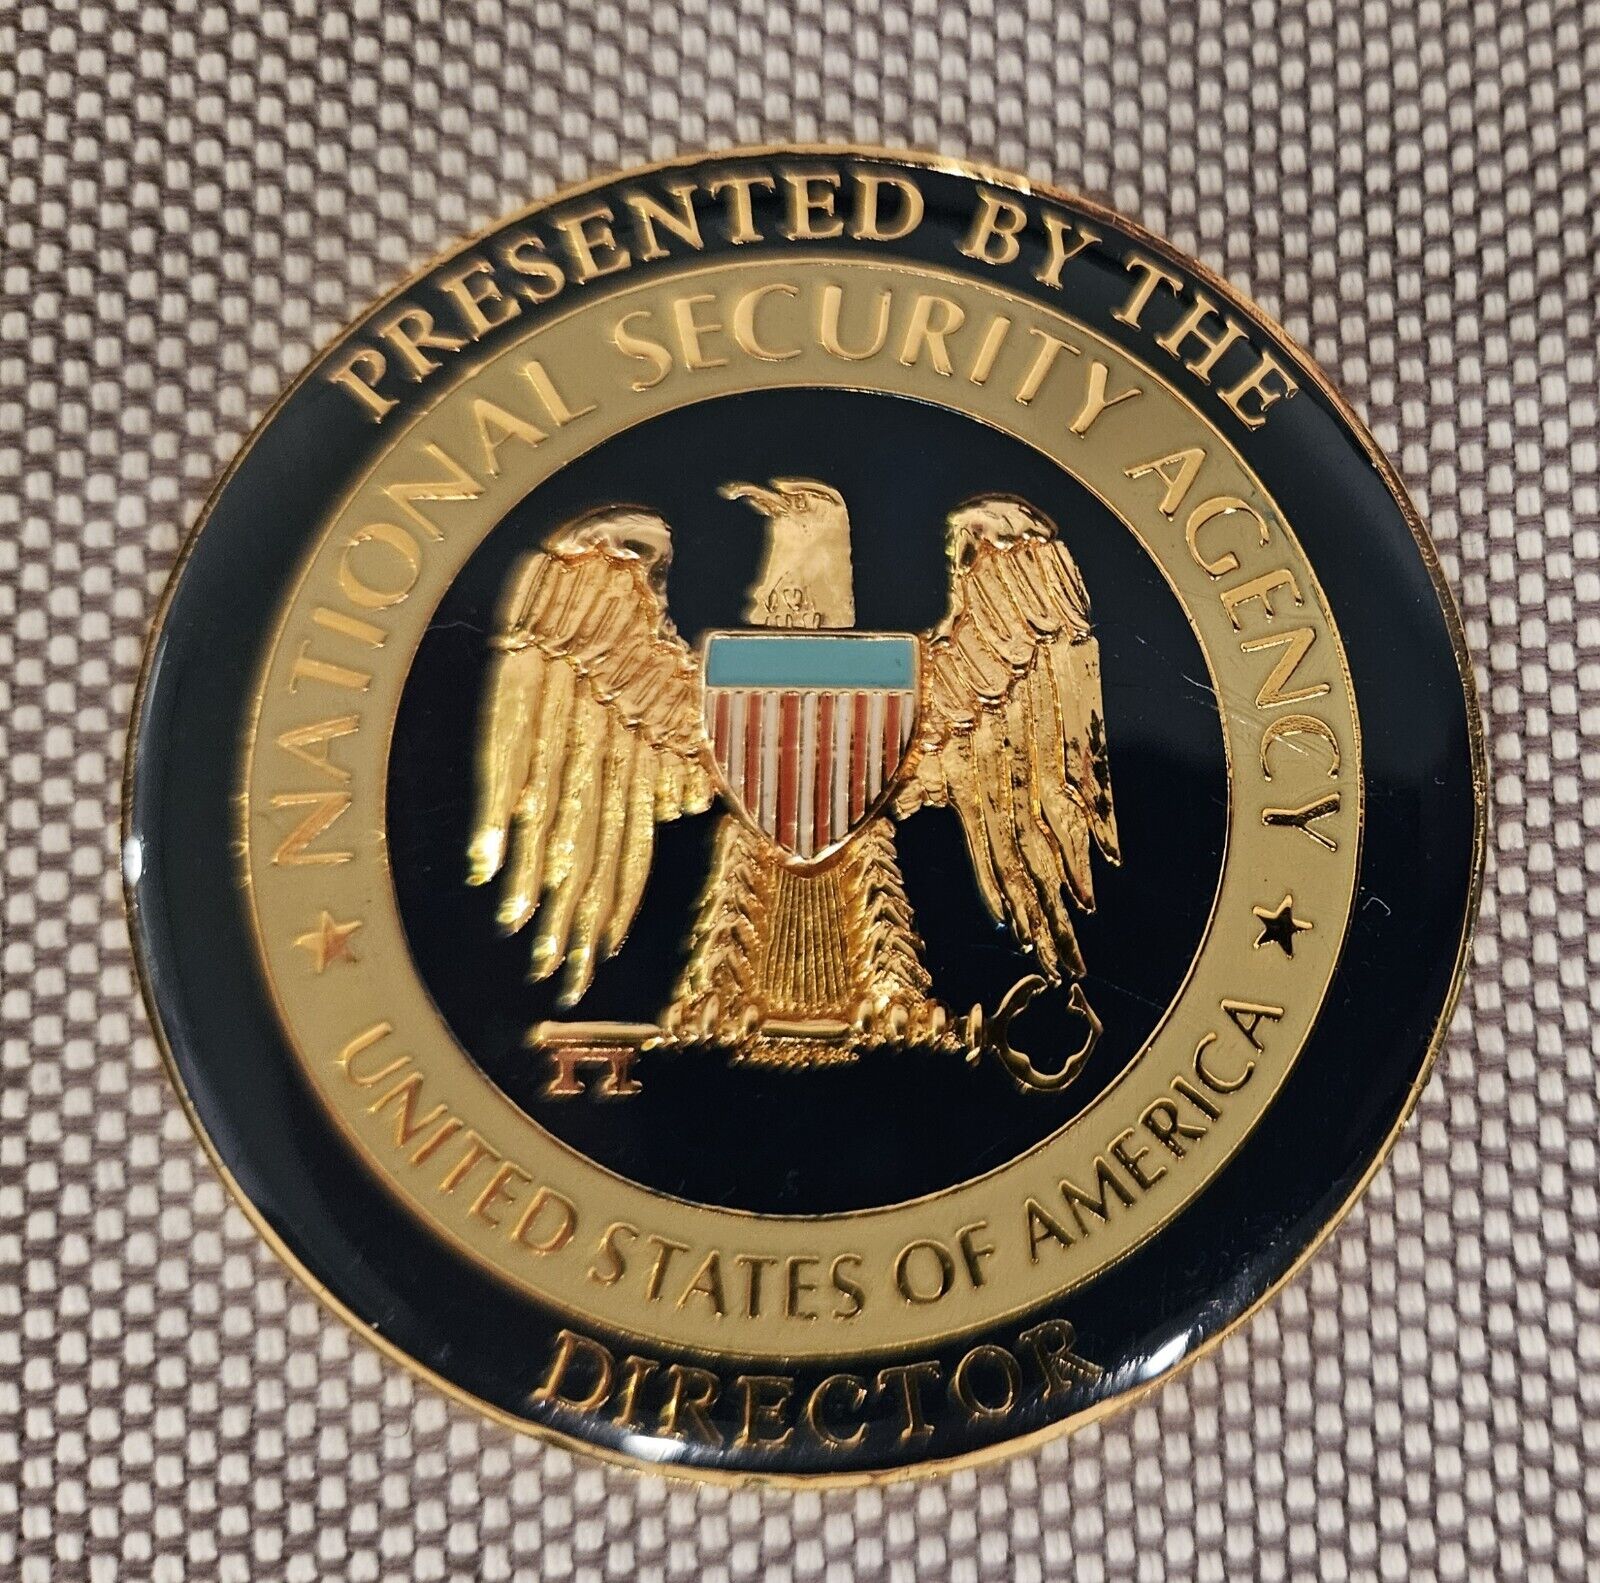 Director General Keith B. Alexander National Security Agency NSA Challenge Coin